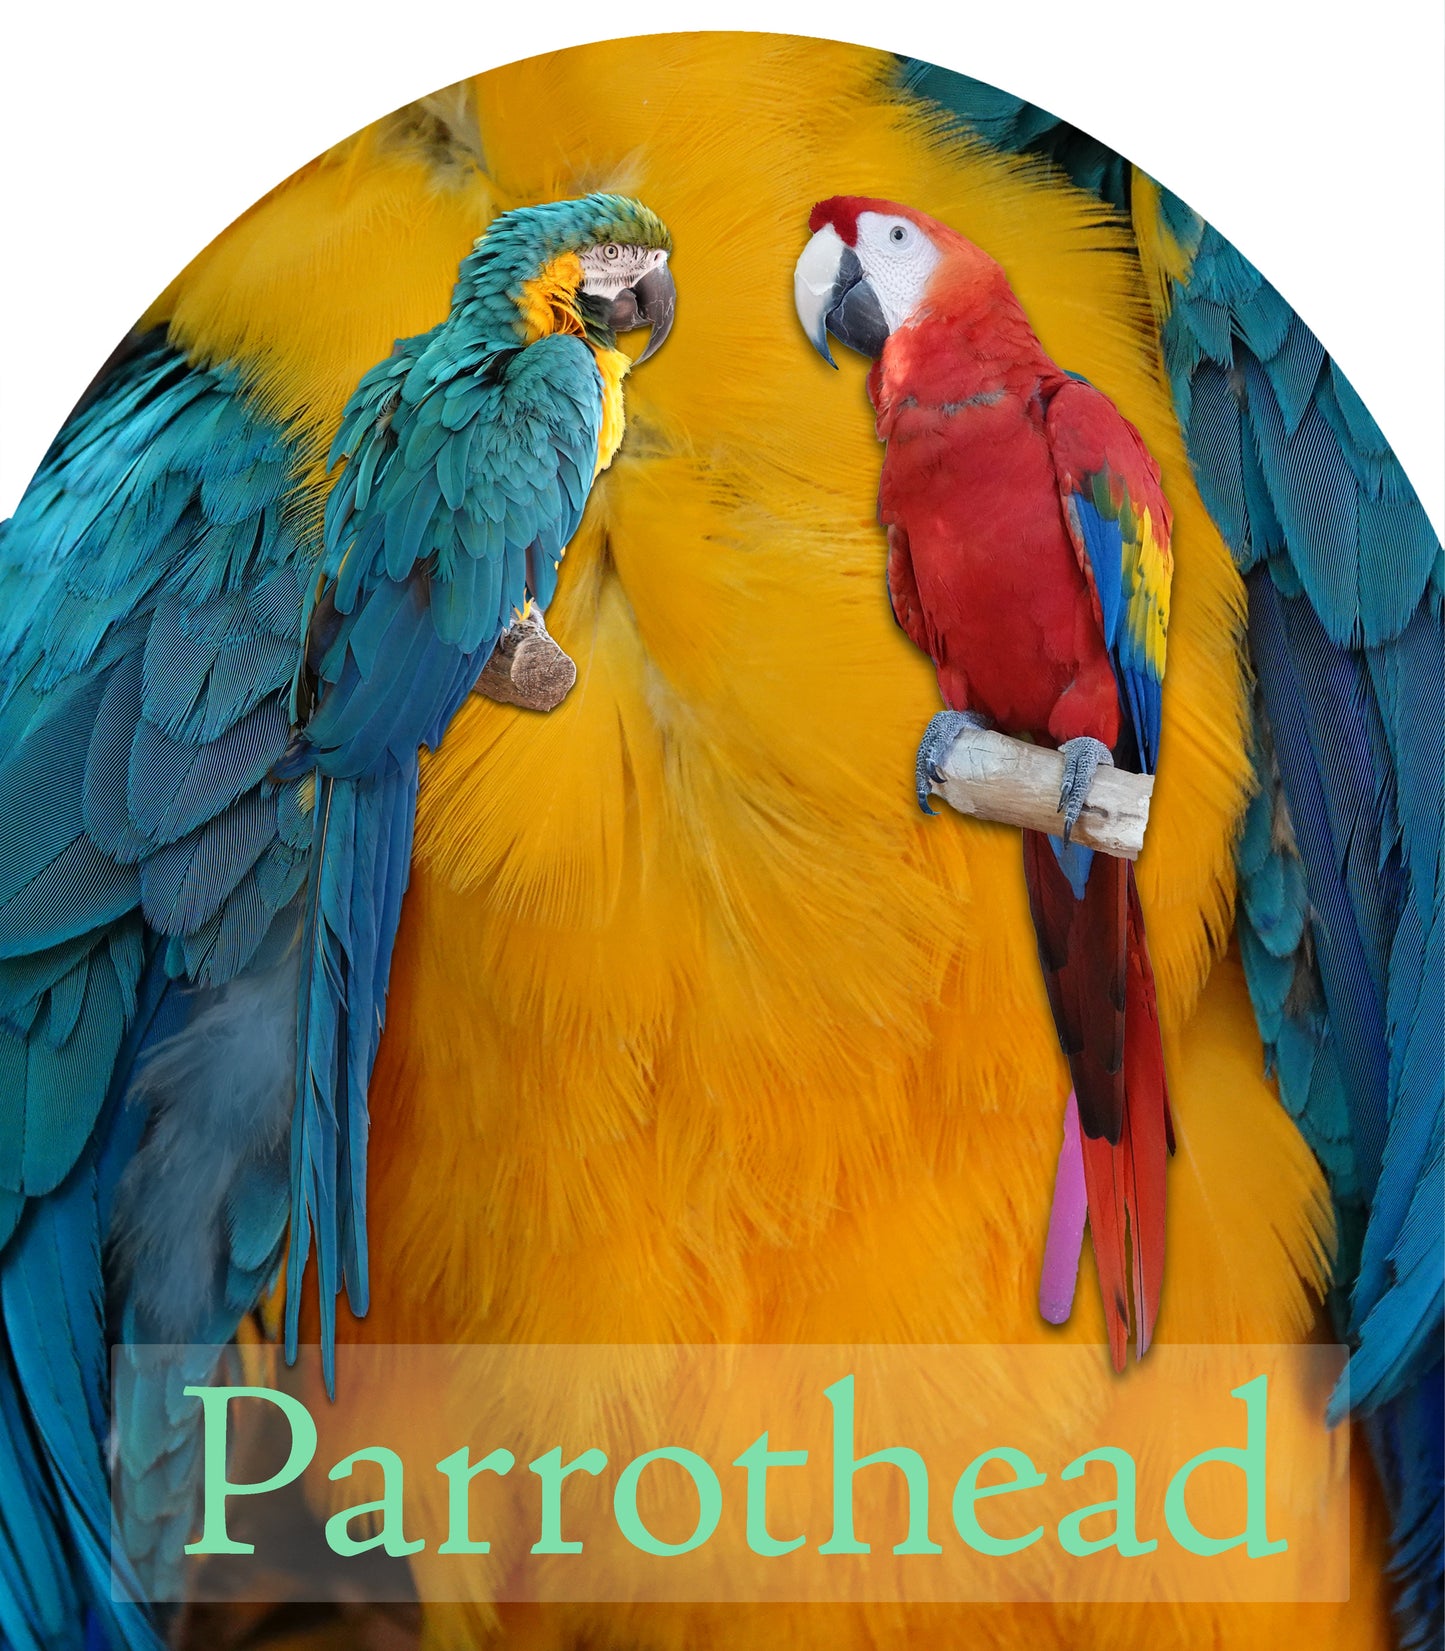 Blue macaw and scarlet macaw facing one another over close-up of blue and yellow feathers showing beach-green Parrothead text